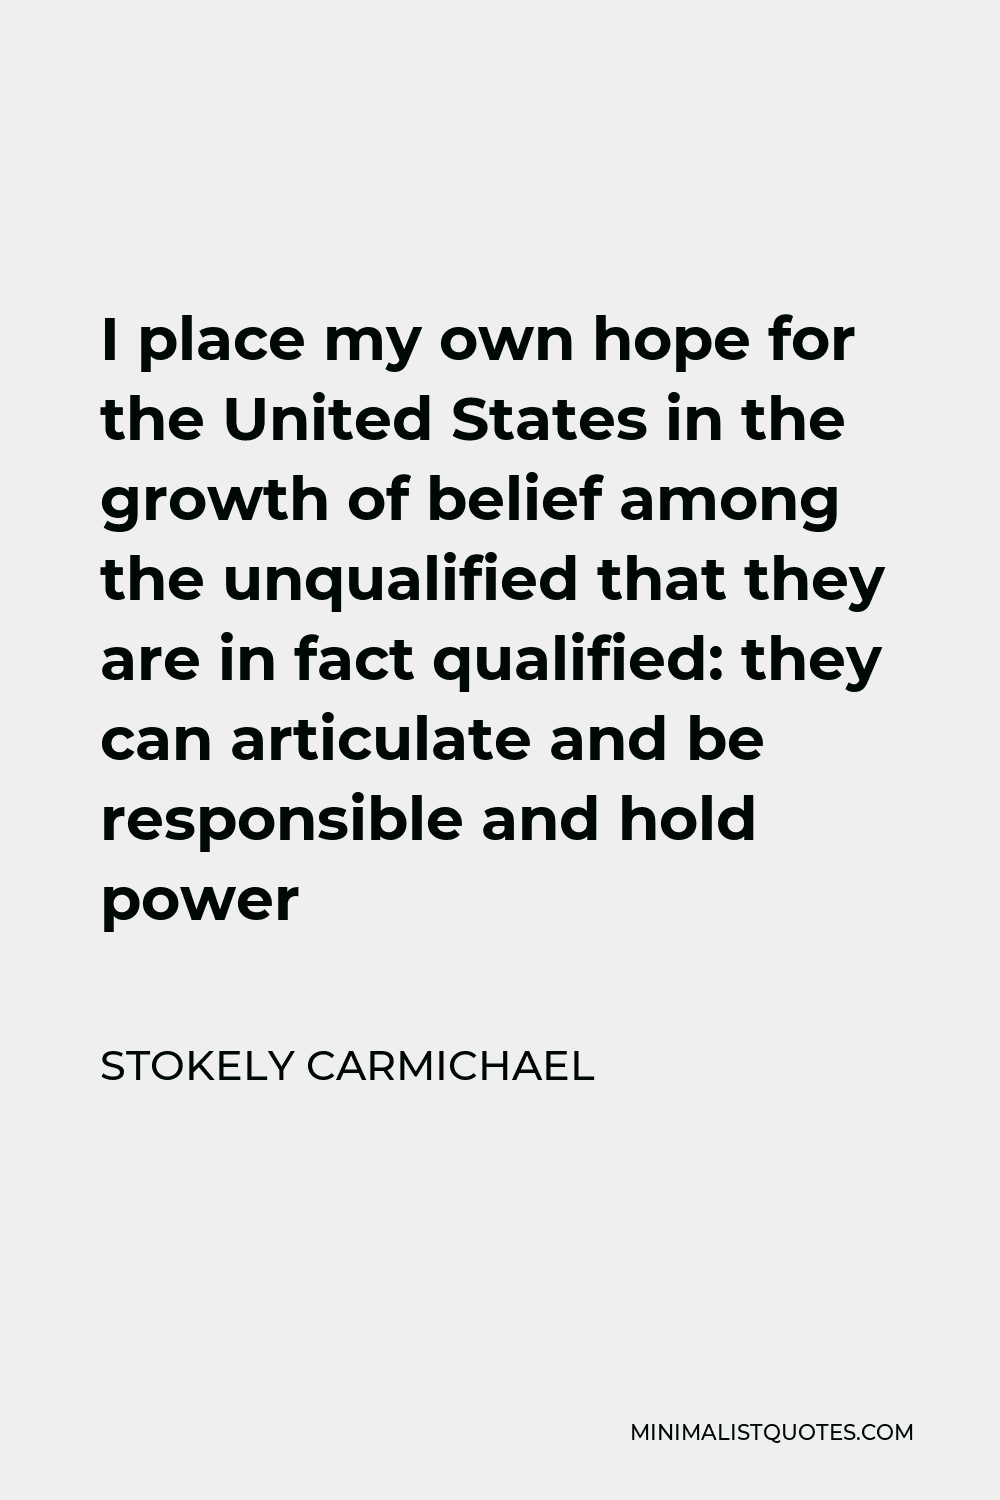 Stokely Carmichael Quote - I place my own hope for the United States in the growth of belief among the unqualified that they are in fact qualified: they can articulate and be responsible and hold power